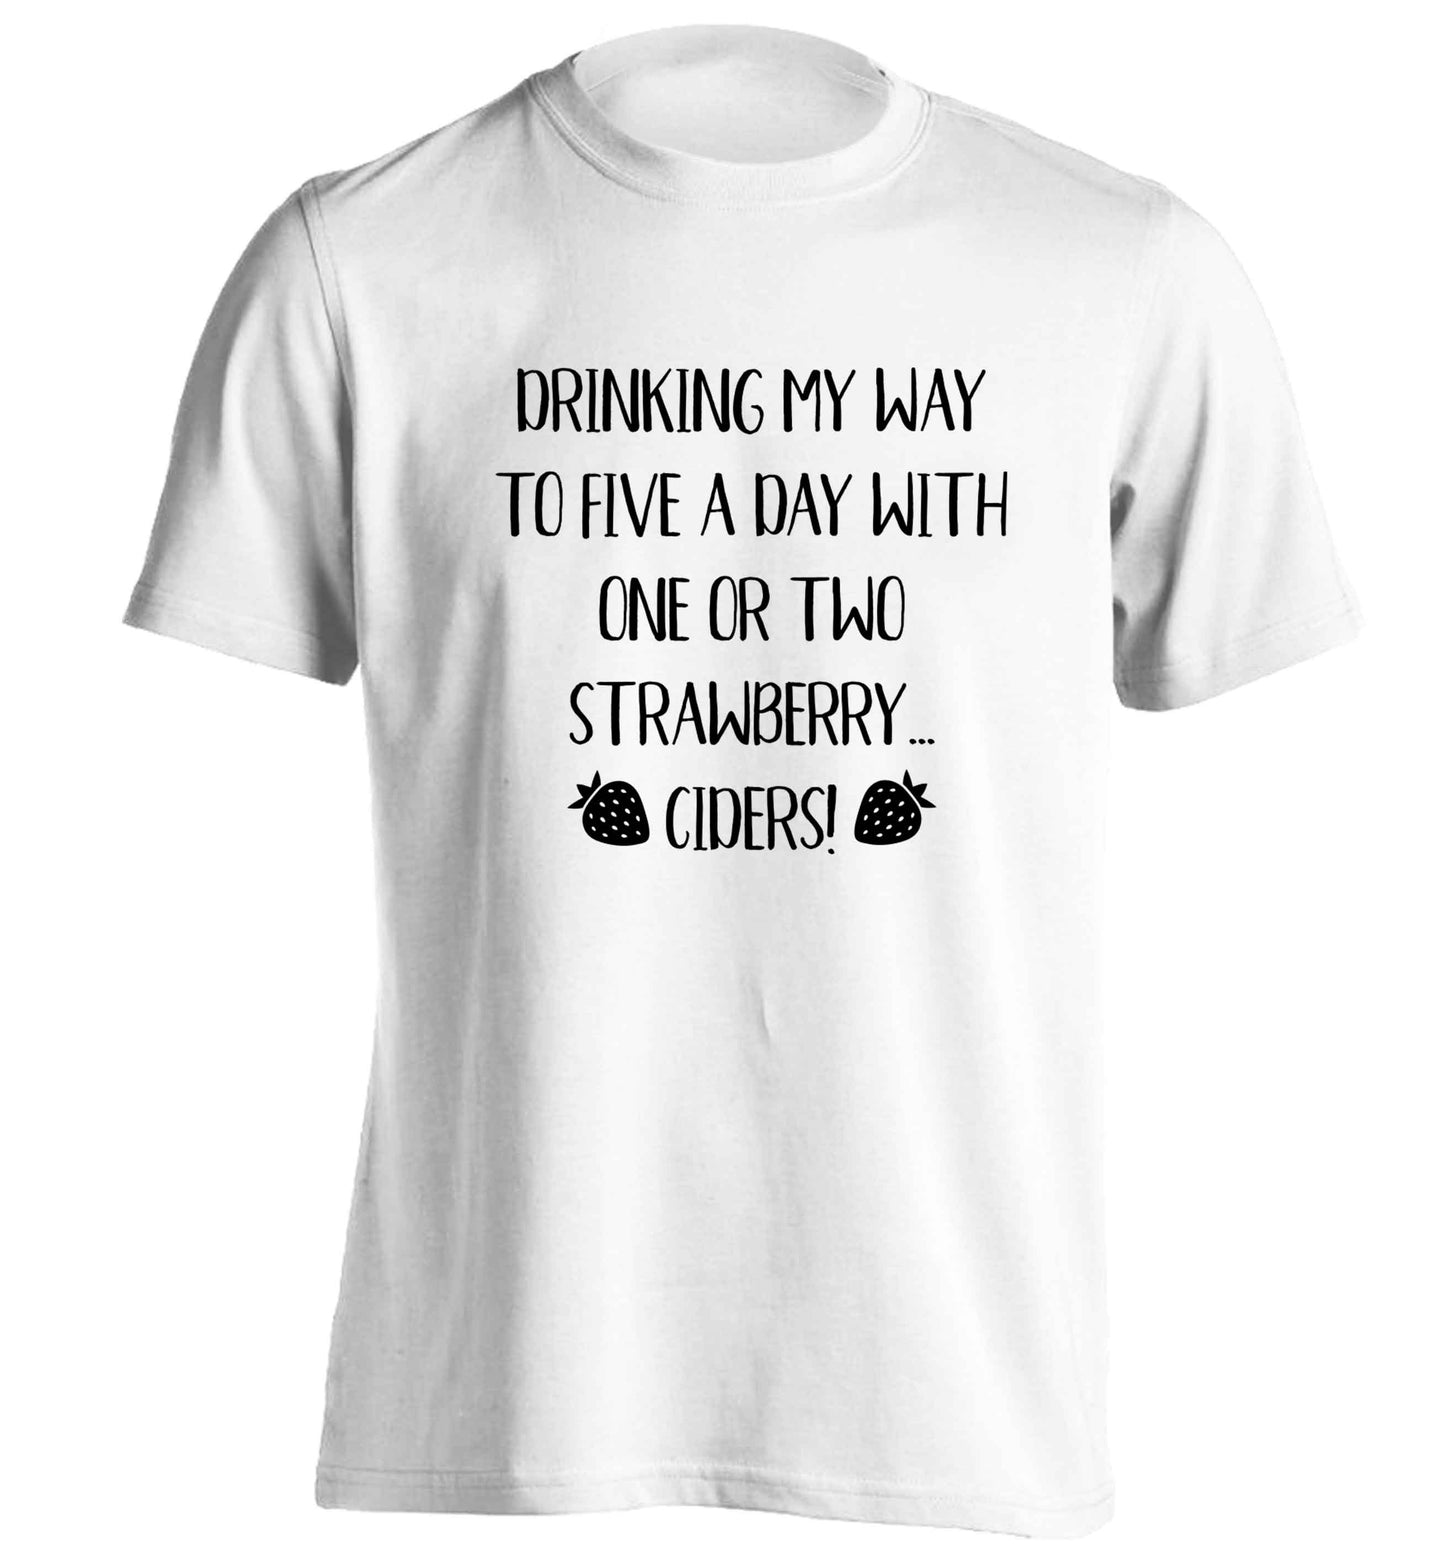 Drinking my way to five a day with one or two strawberry ciders adults unisex white Tshirt 2XL